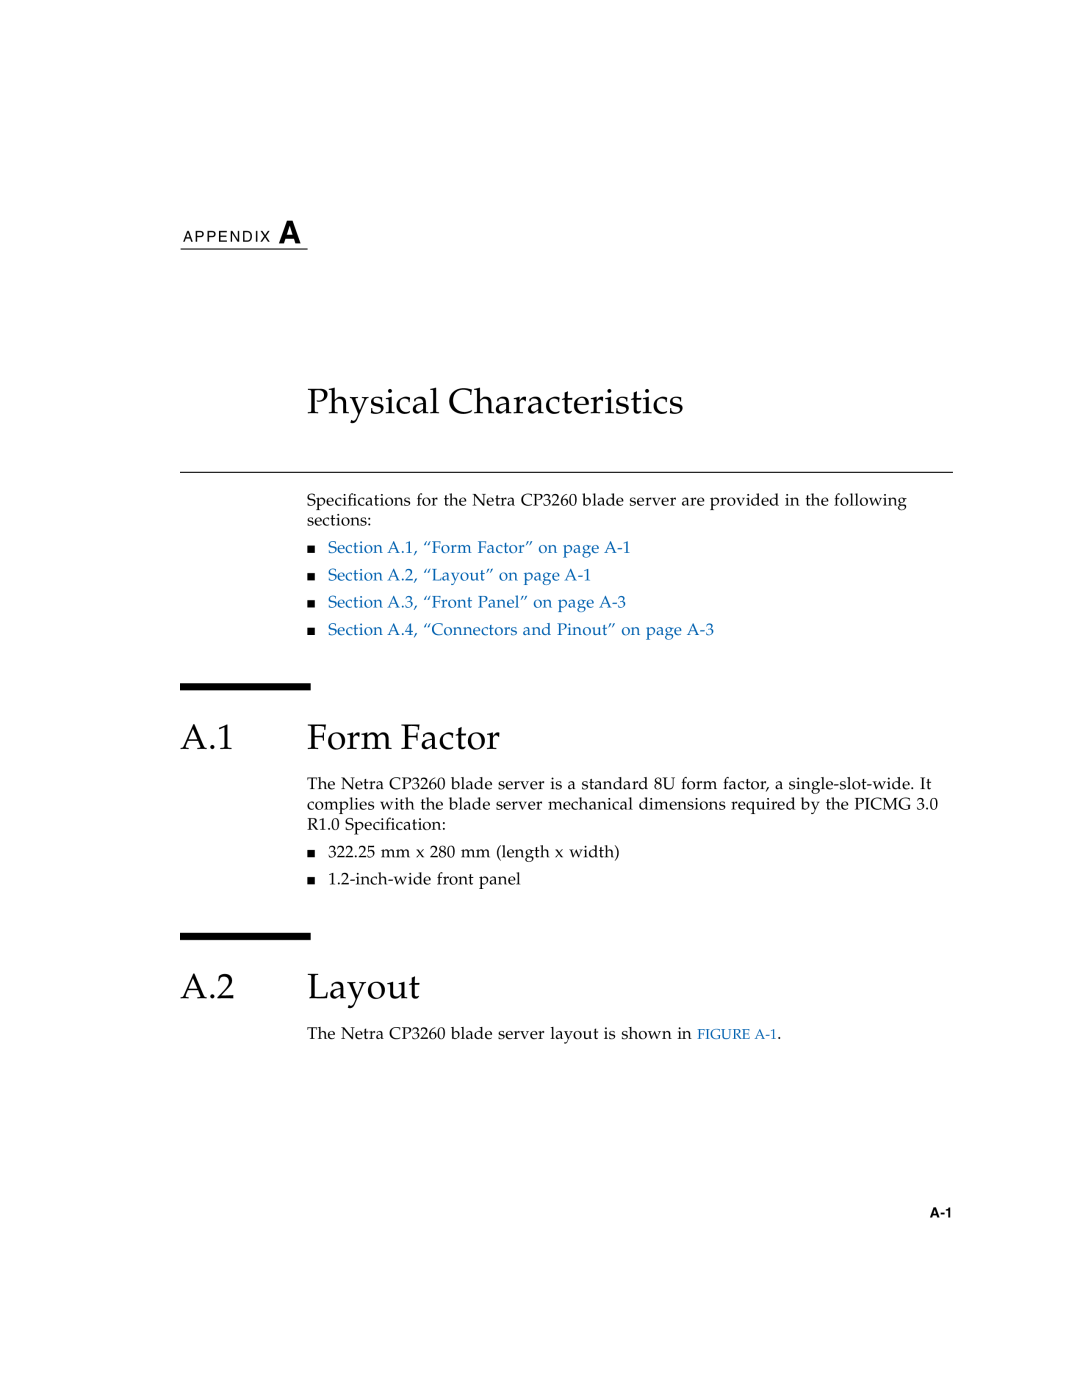 Sun Microsystems CP3260 Physical Characteristics, A.1 Form Factor, A.2 Layout, Section A.1, “Form Factor” on page A-1 